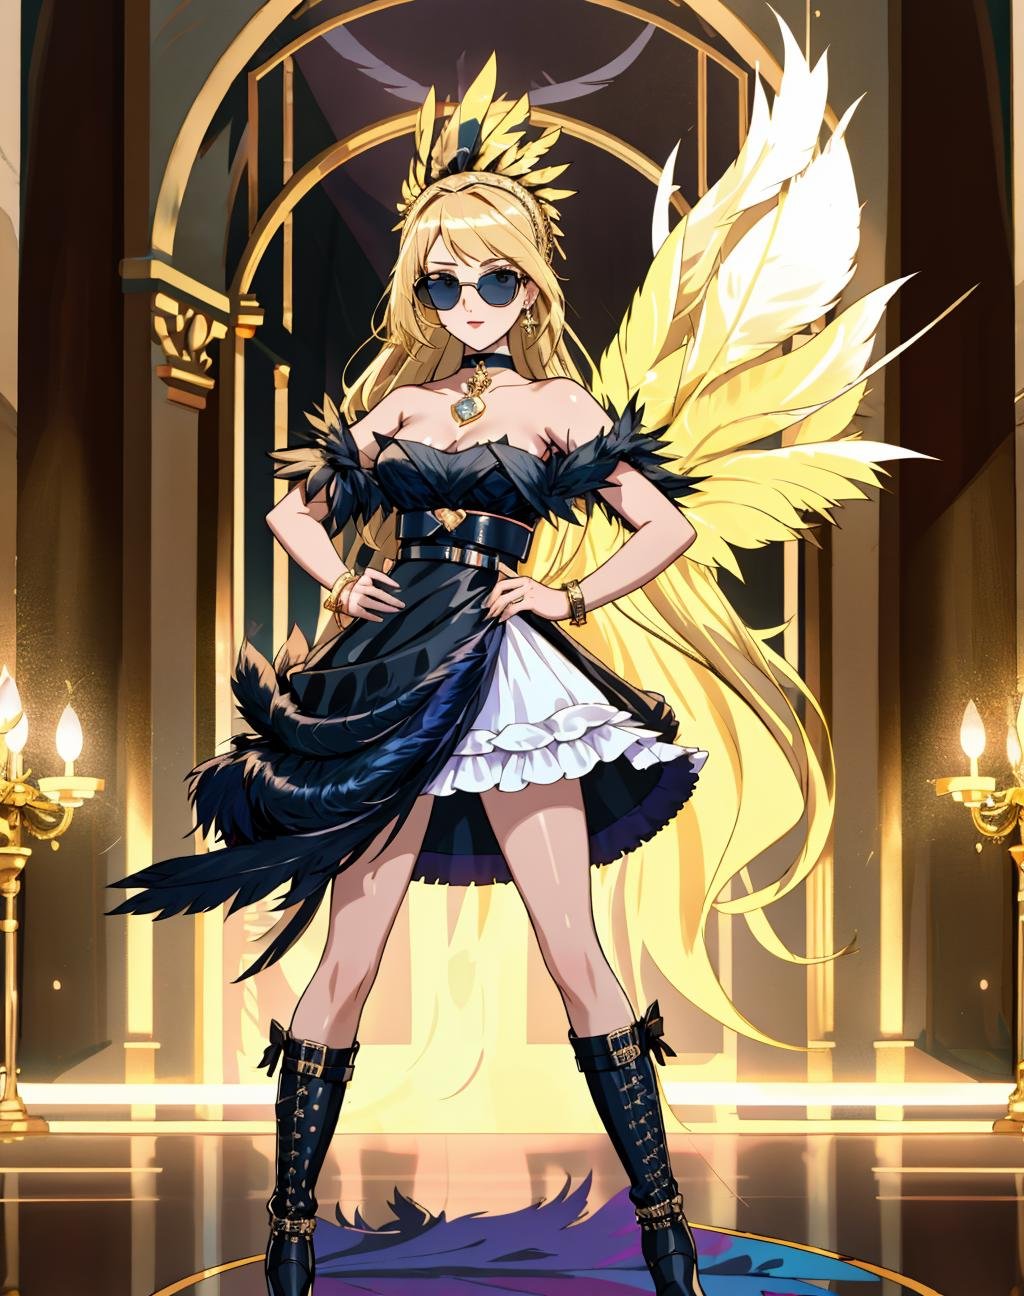 solo,1girl,4K, Masterpiece, highres, absurdres,blonde Nadia with sunglasses and a choker,edgNoire,Haute_Couture, ([see through designer dress| in a black dress ]::0.5) , ((feathered top)) and boots, woman wearing a Haute_Couture dress, front view, fashion show background <lora:edgLycorisNoire:0.8><lora:Nadia:0.4>